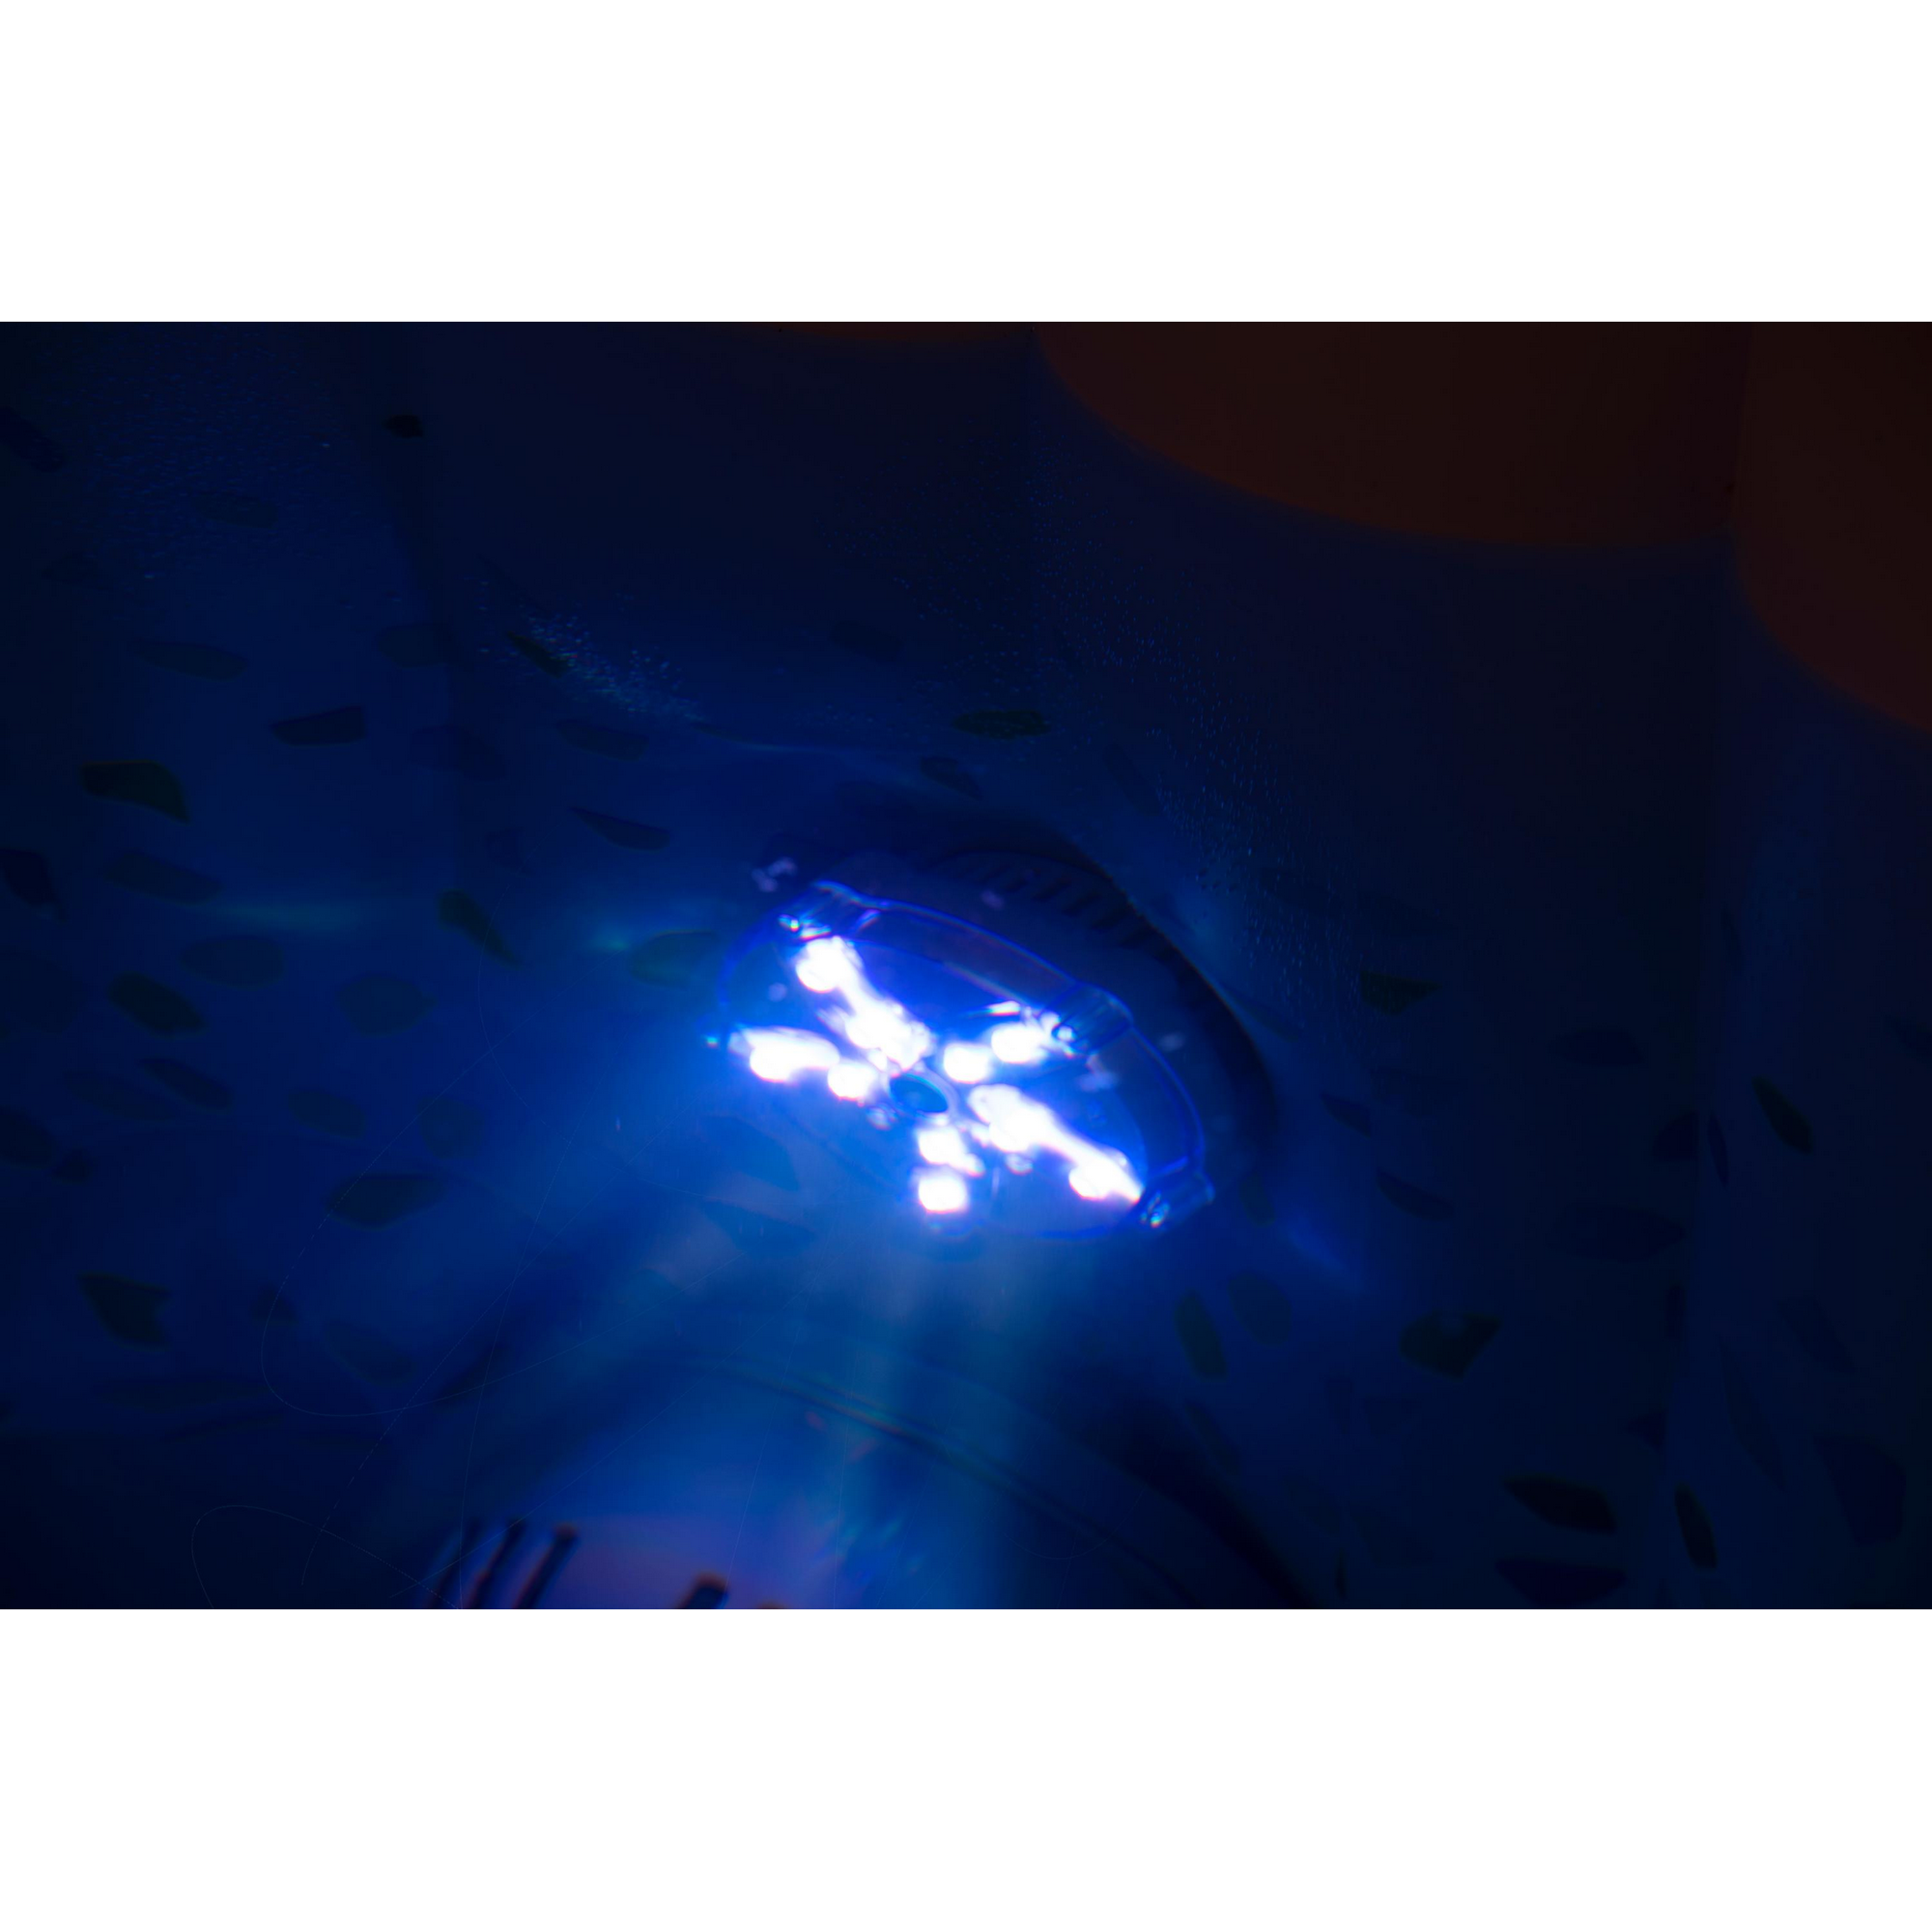 LED-Poolbeleuchtung 'LAY-Z-SPA' mit Farbwechsler Ø 9,2 x 6,2 cm + product picture